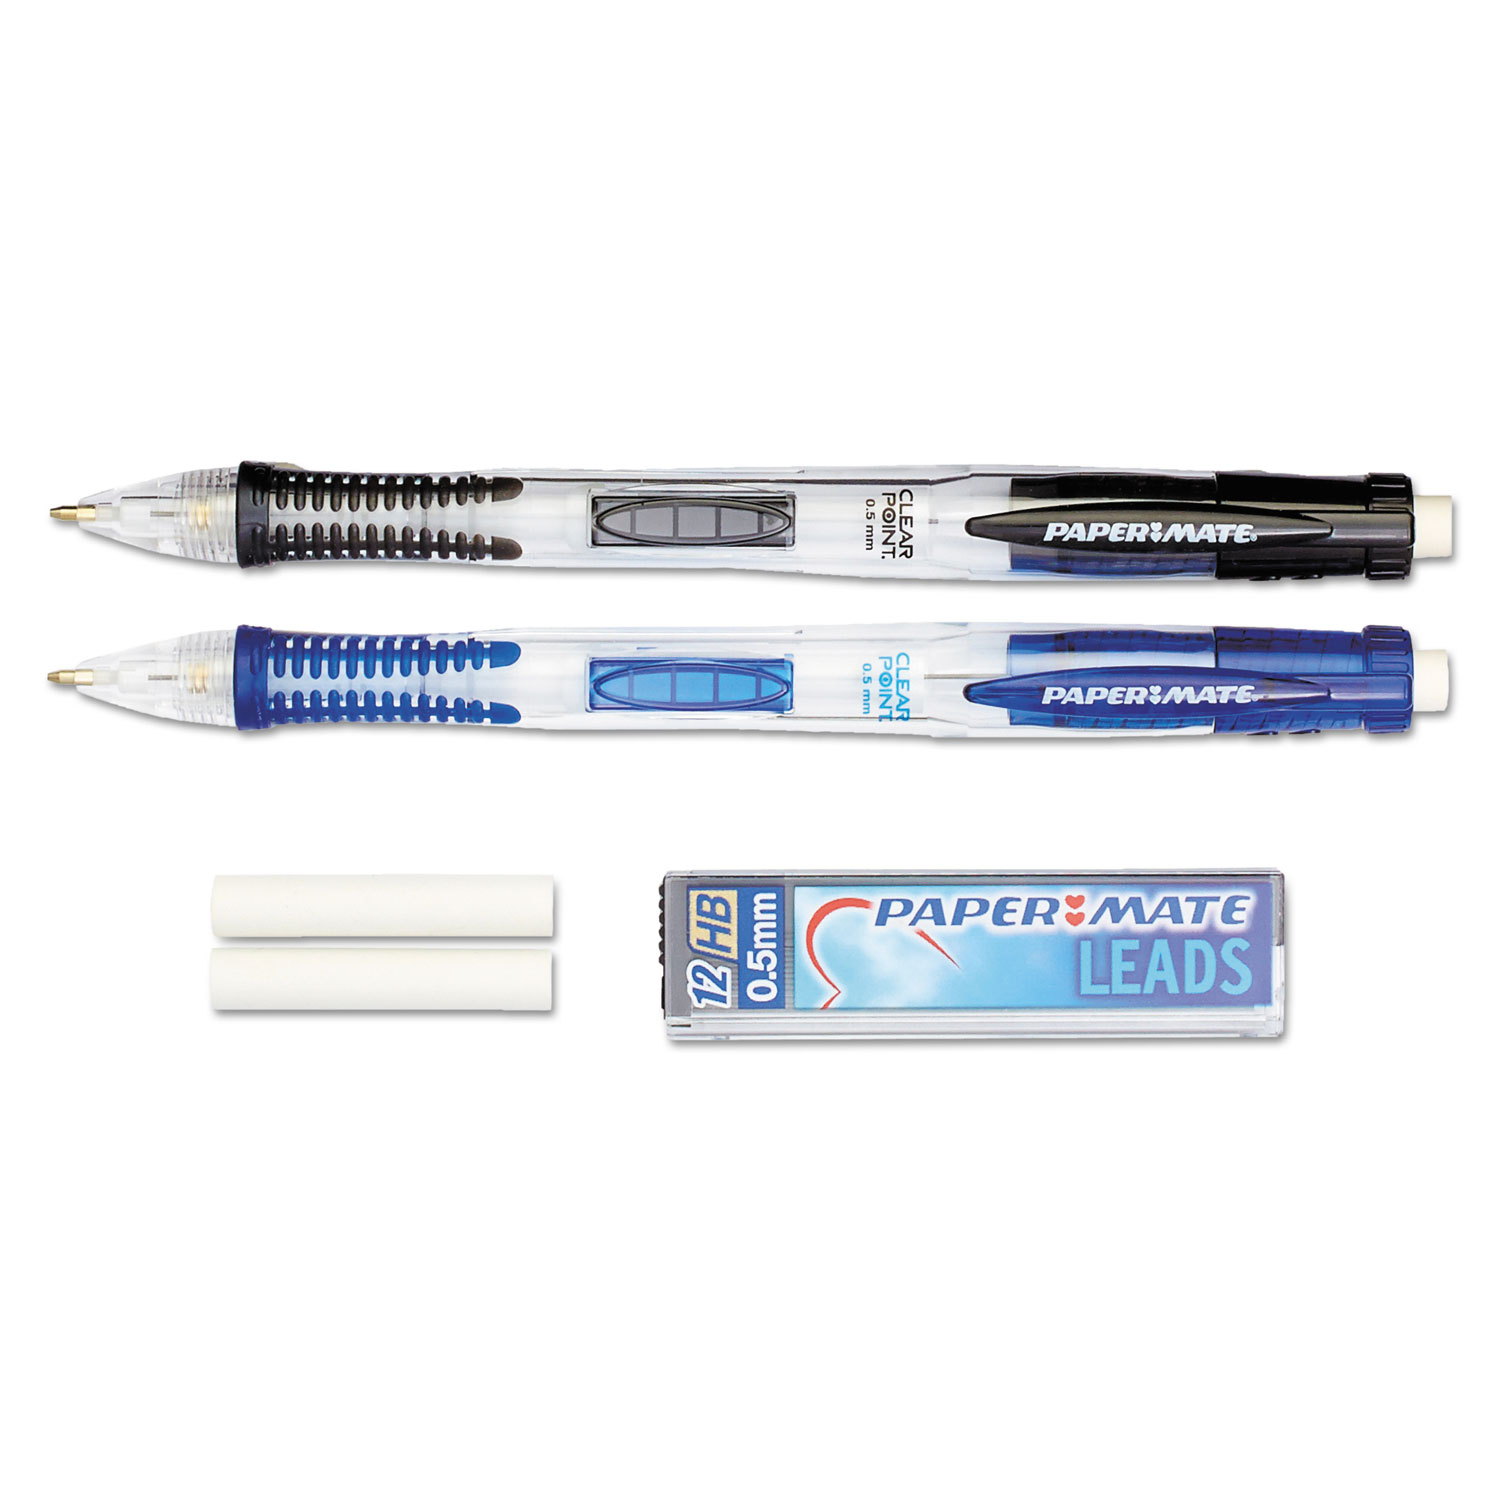 Paper Mate ClearPoint Elite 0.7mm Mechanical Pencils, Blue Barrel Pack of 3